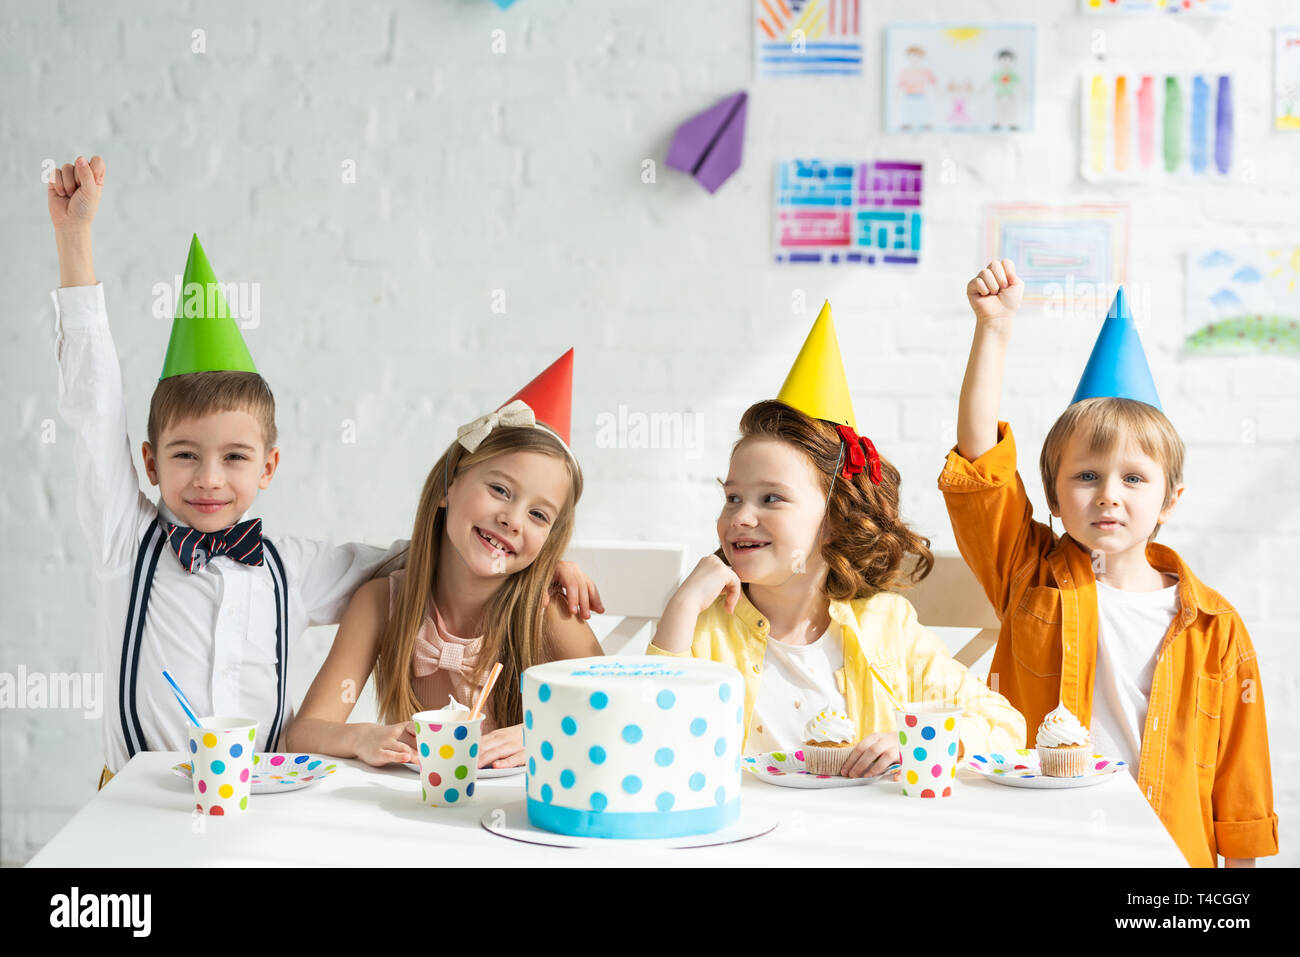 Happy children celebrating birthday with colorful party hats